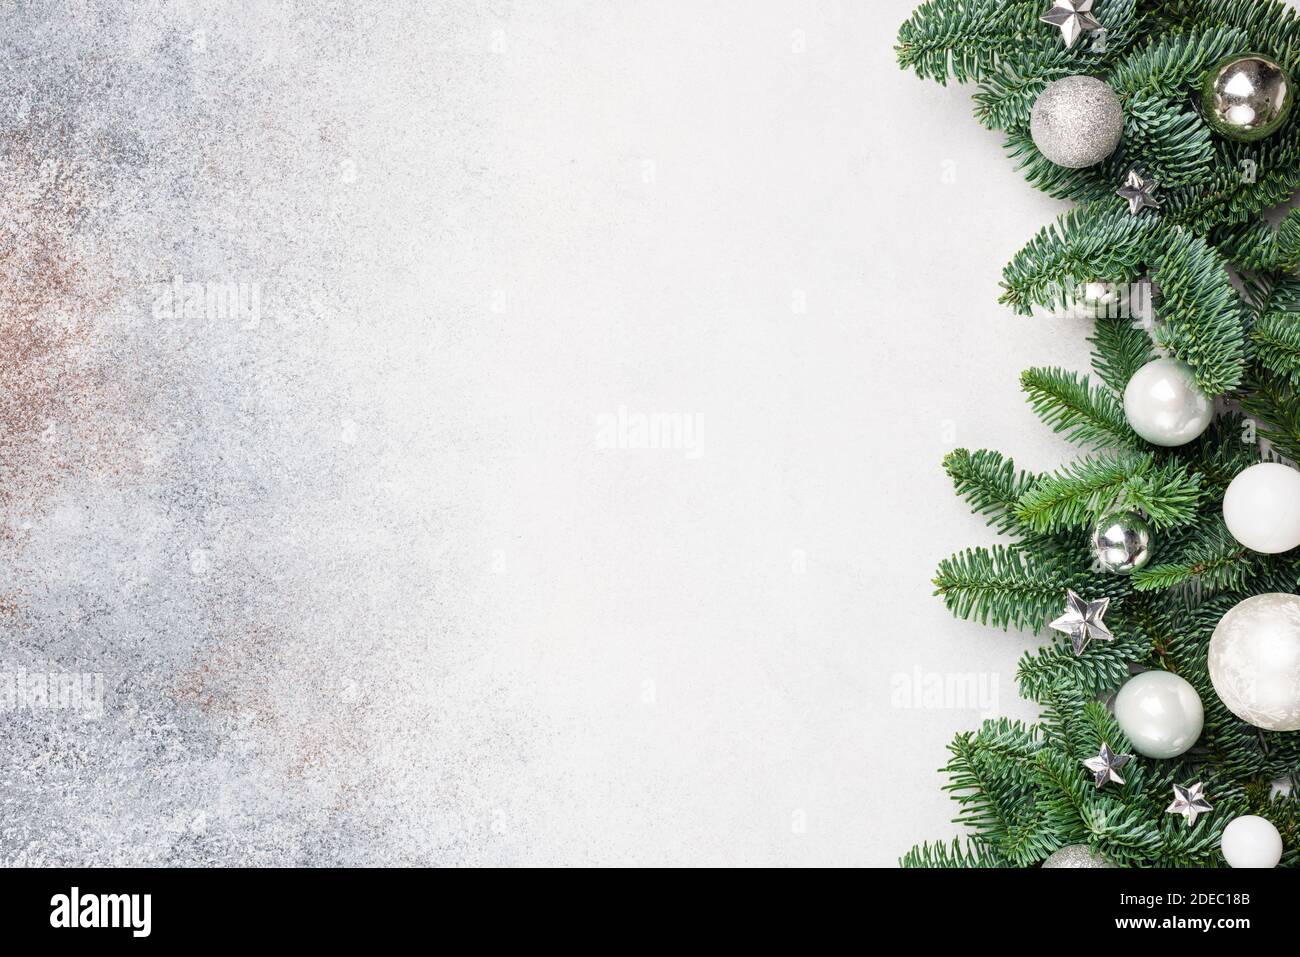 Christmas background with fir tree and silver white toys, copy space for text design greeting Stock Photo